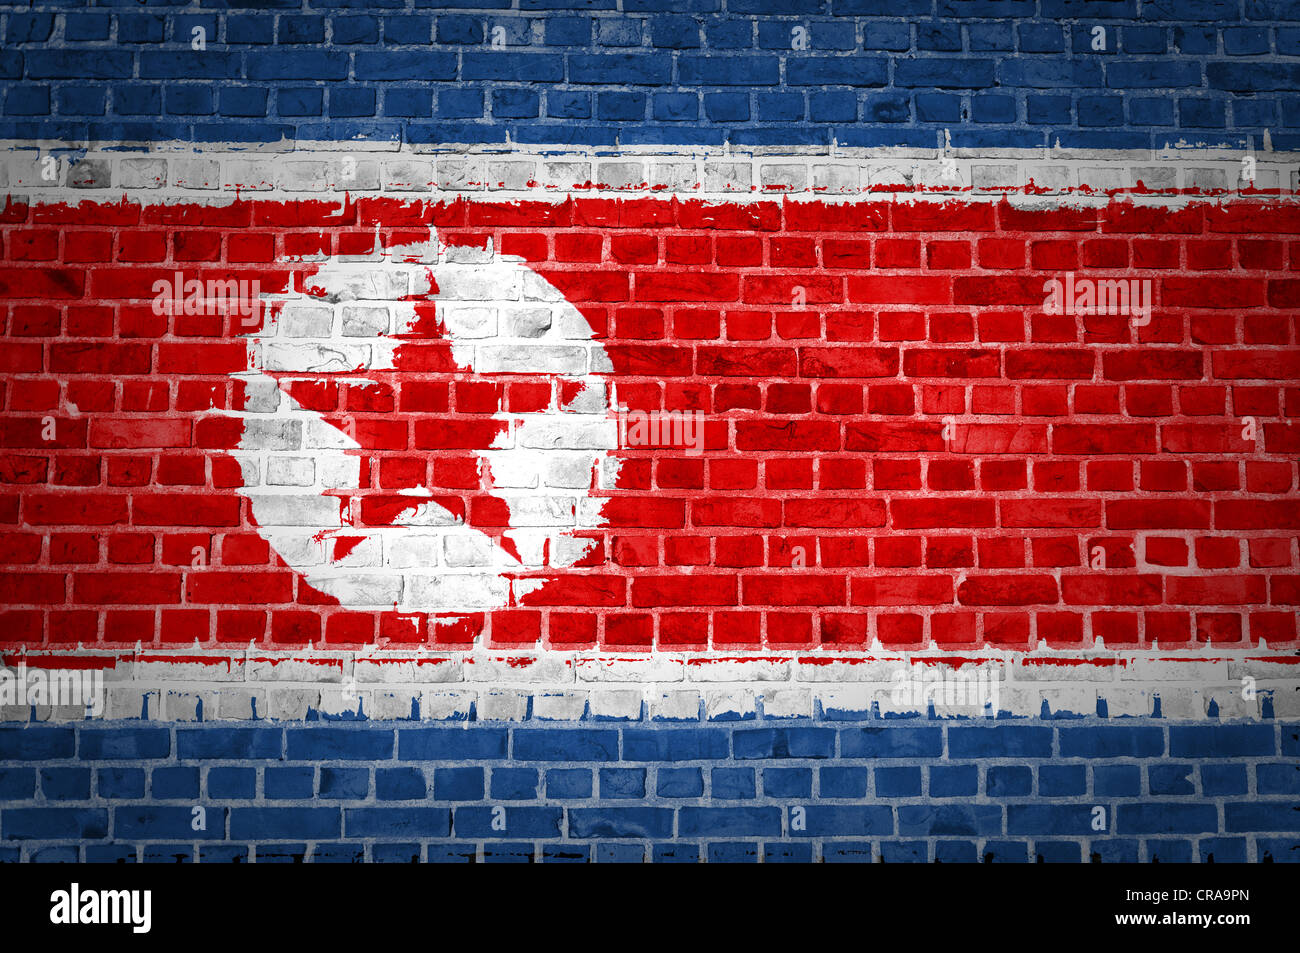 An image of the North Korea flag painted on a brick wall in an urban location Stock Photo